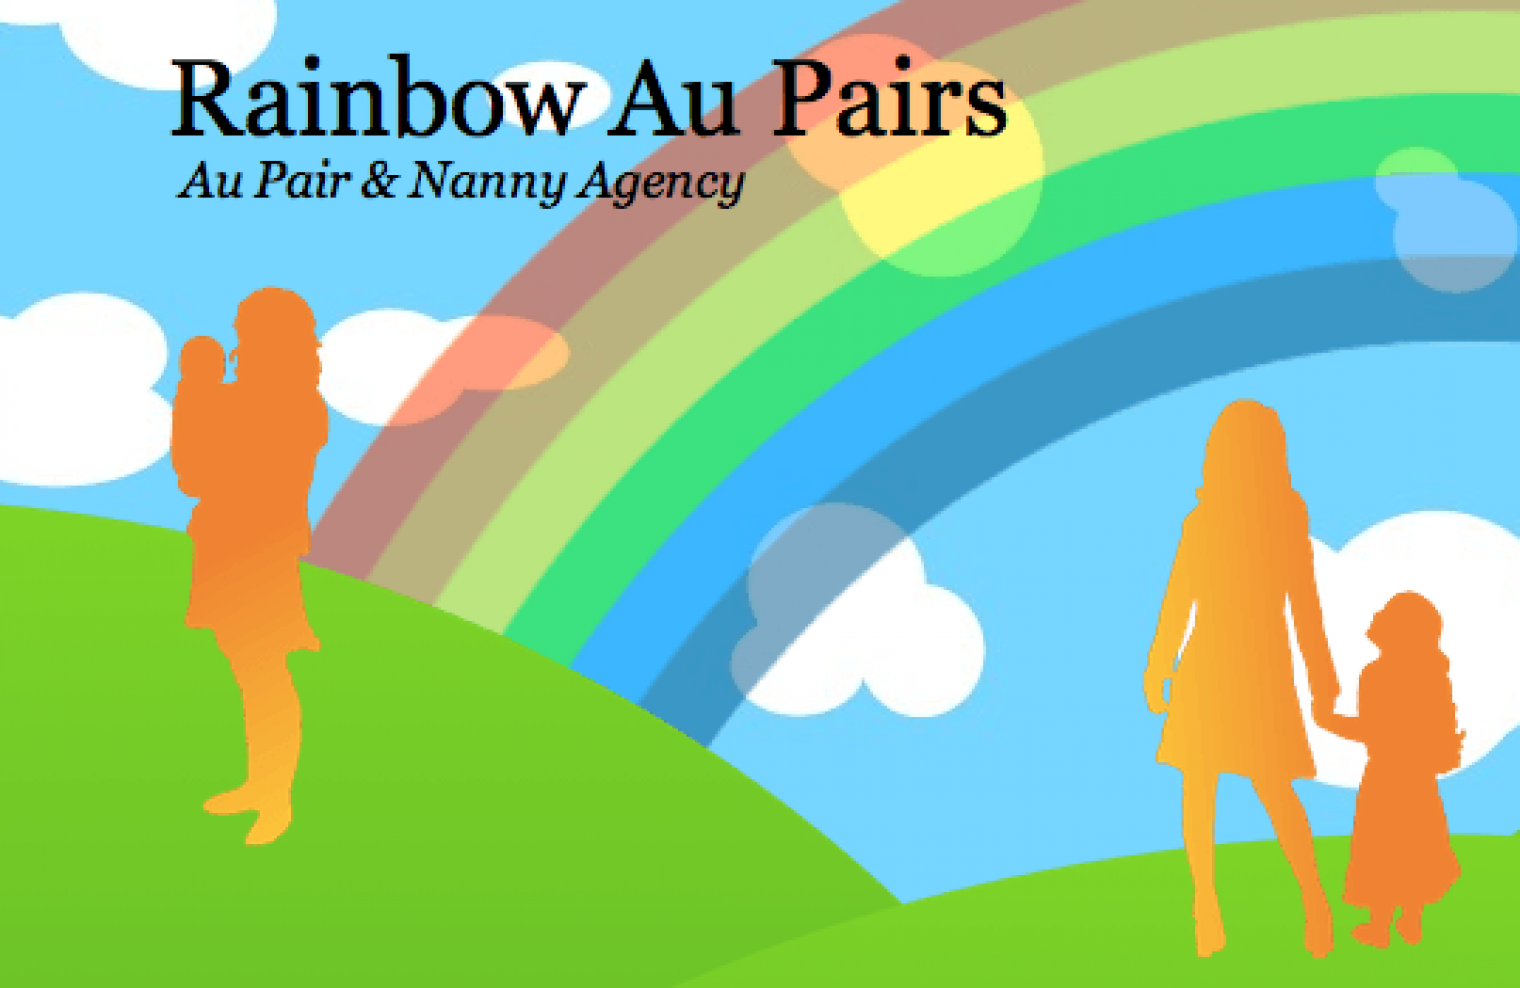 Our newest member: Rainbow Au Pairs